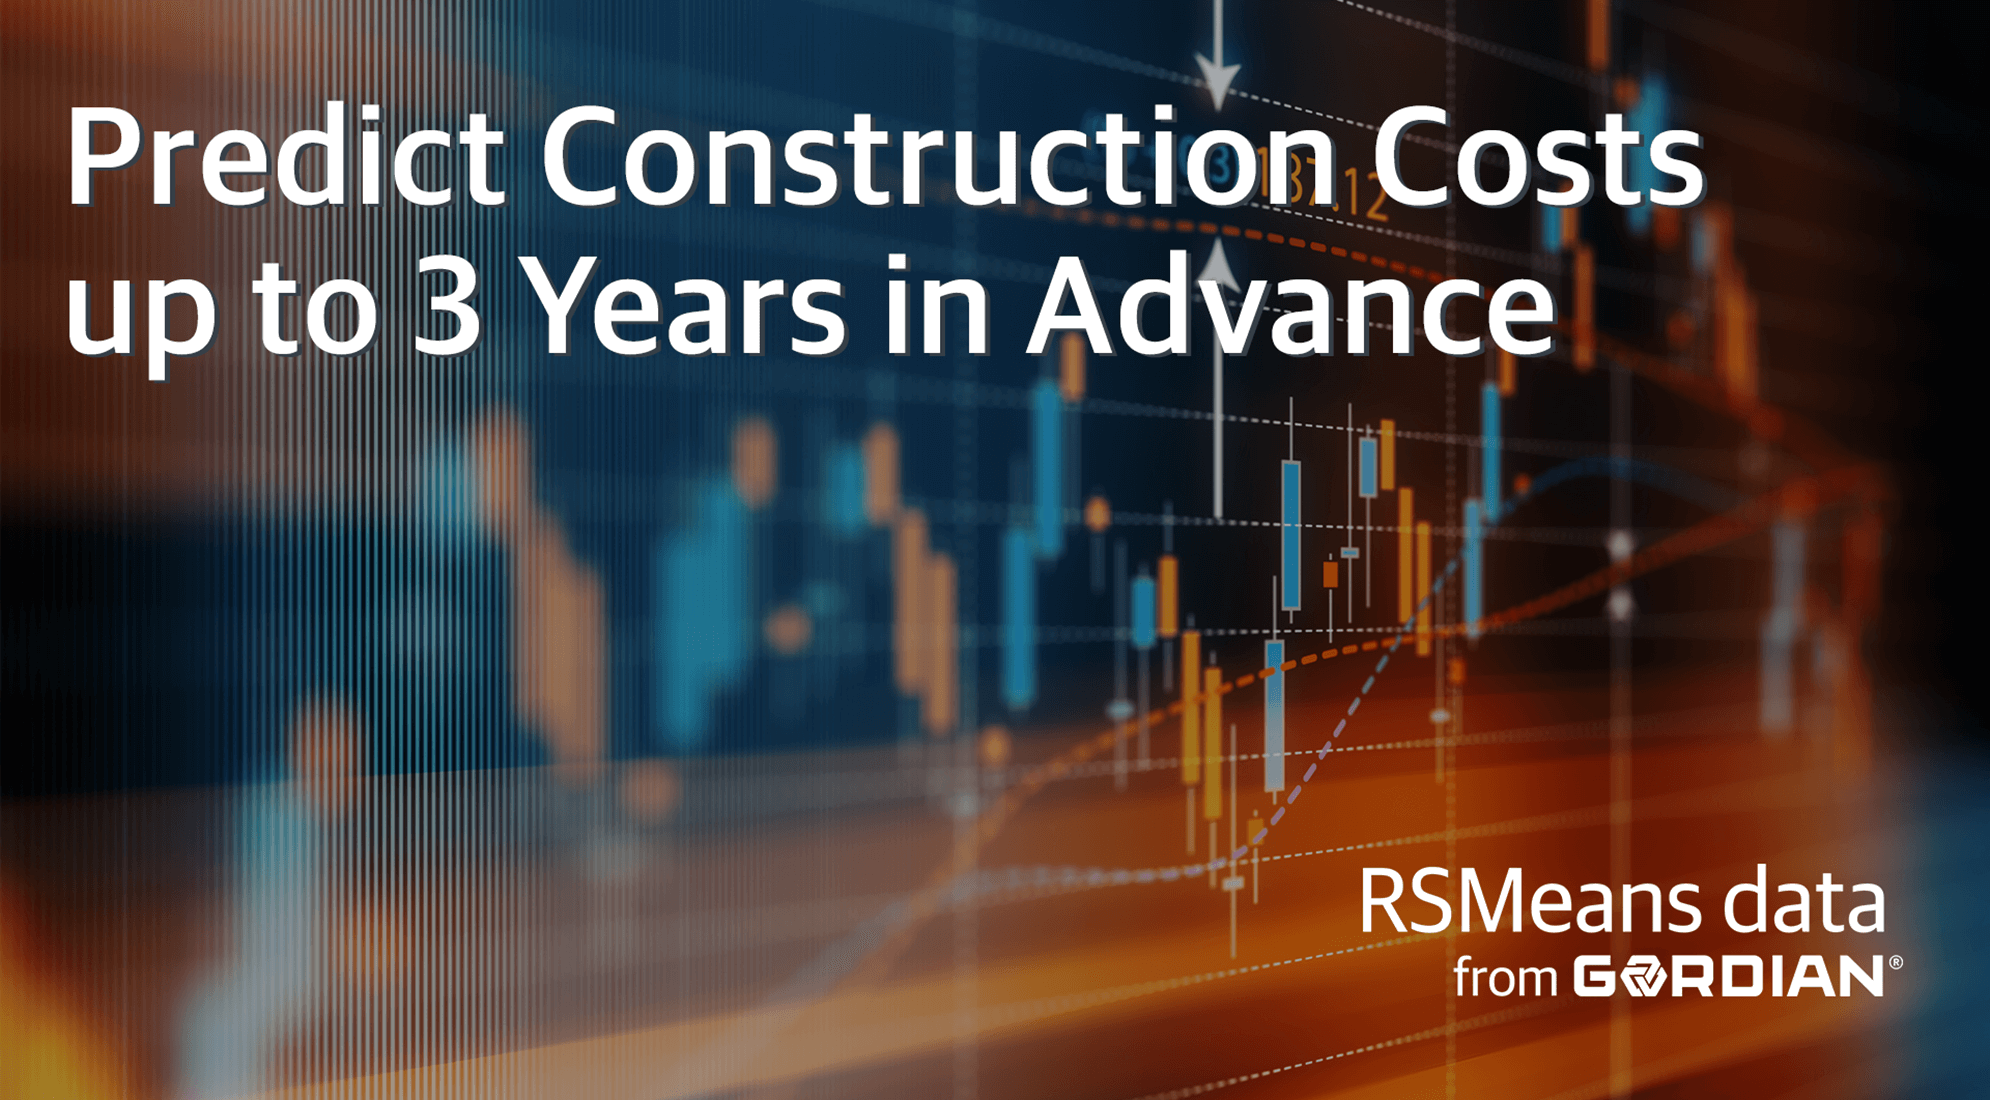 Discover the Power of Predictive Construction Cost Data